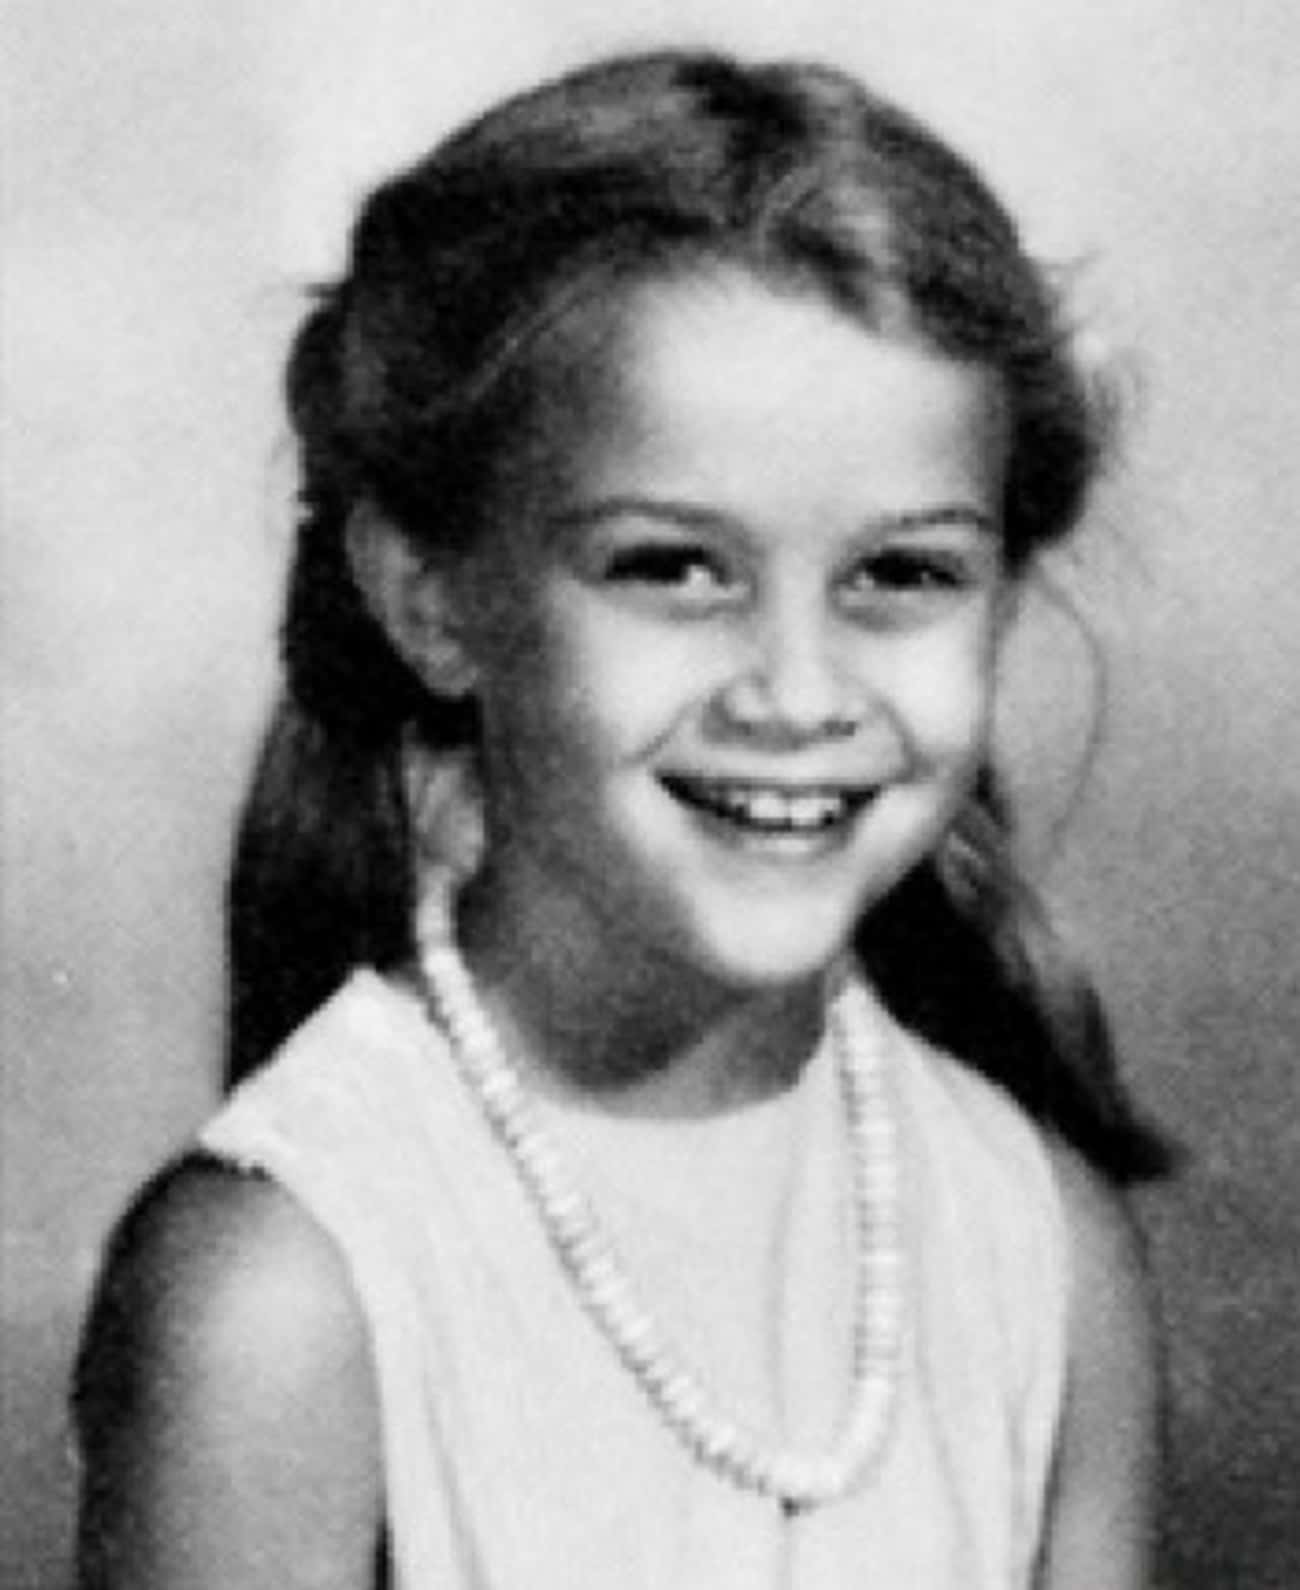 Young Reese Witherspoon in White Dress as a Kid